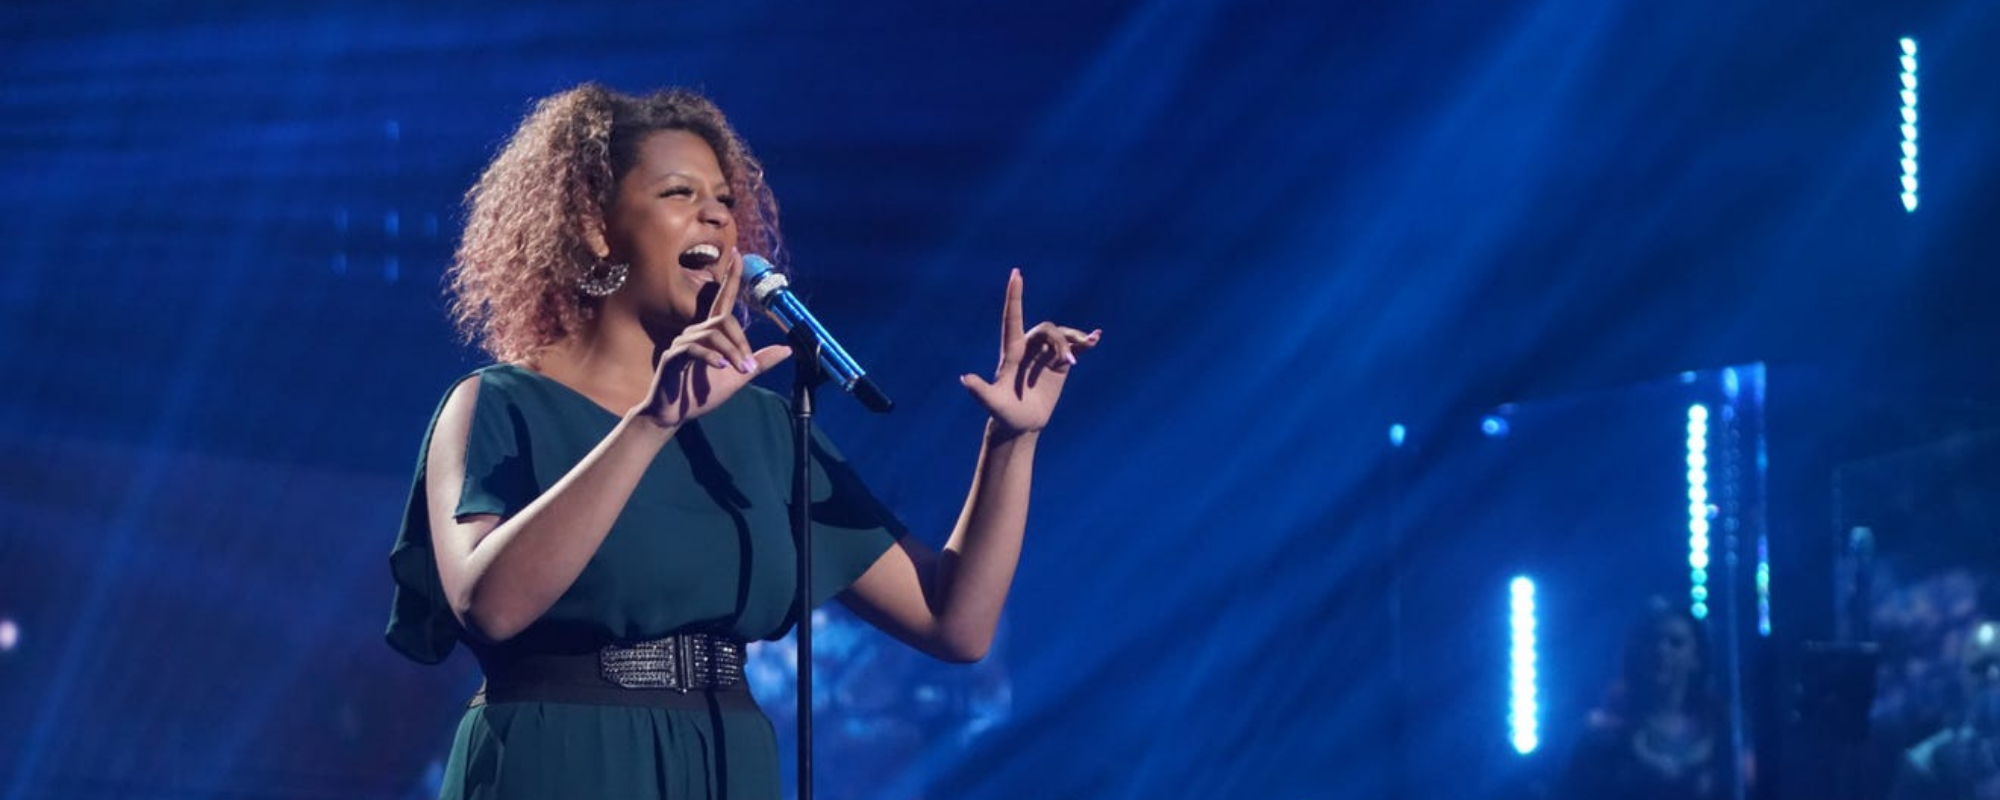 Alyssa Wray Keeps Pace from Carrie Underwood to Whitney Houston on ‘American Idol’, First 12 of Top 24 Performances